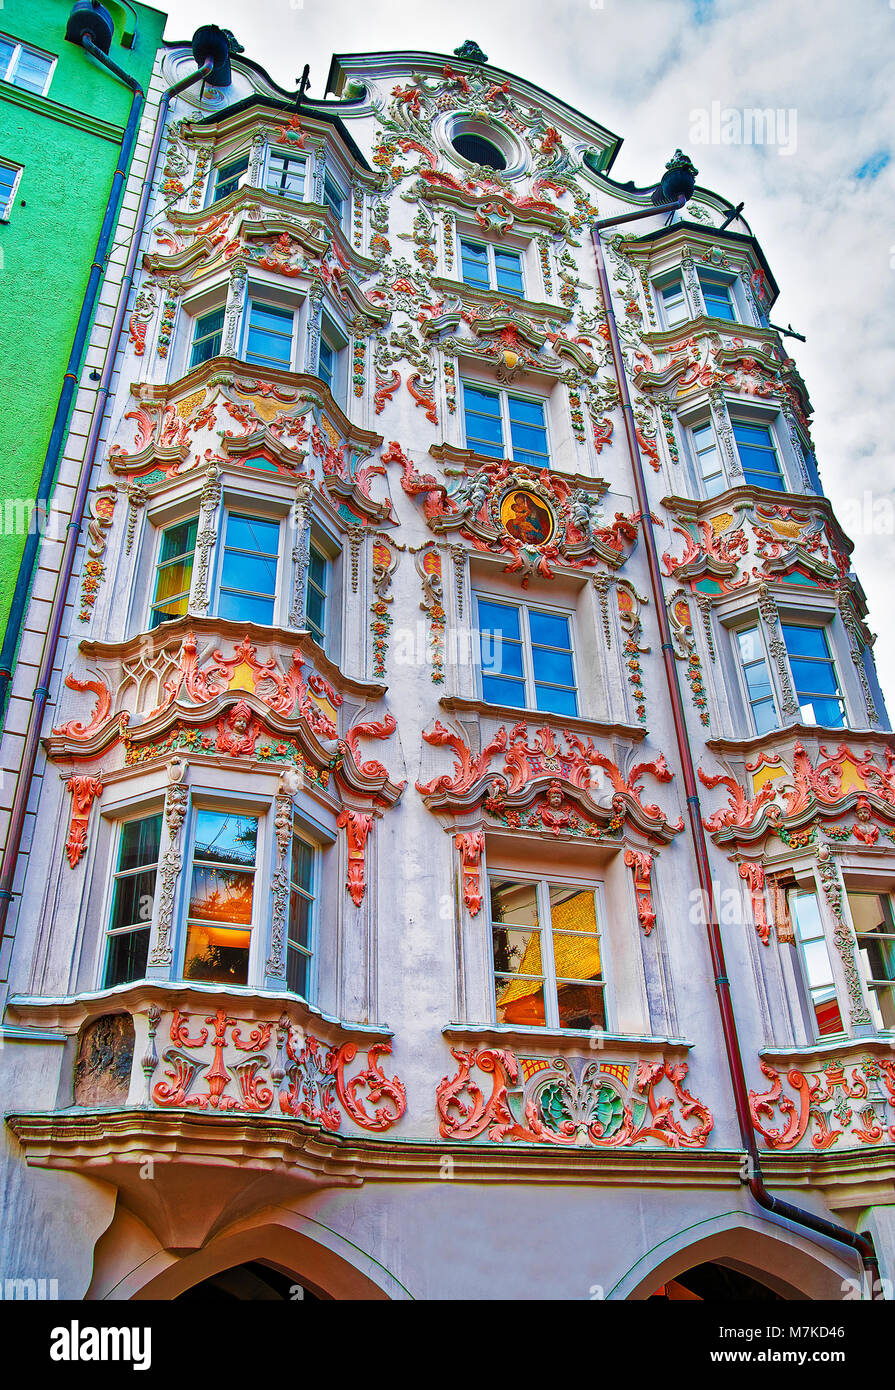 Innsbruck, Austria - January 4, 2010: House of Helbling with Baroque style facade in Innsbruck of Austria. Ornamental facade is decorated with sculptu Stock Photo